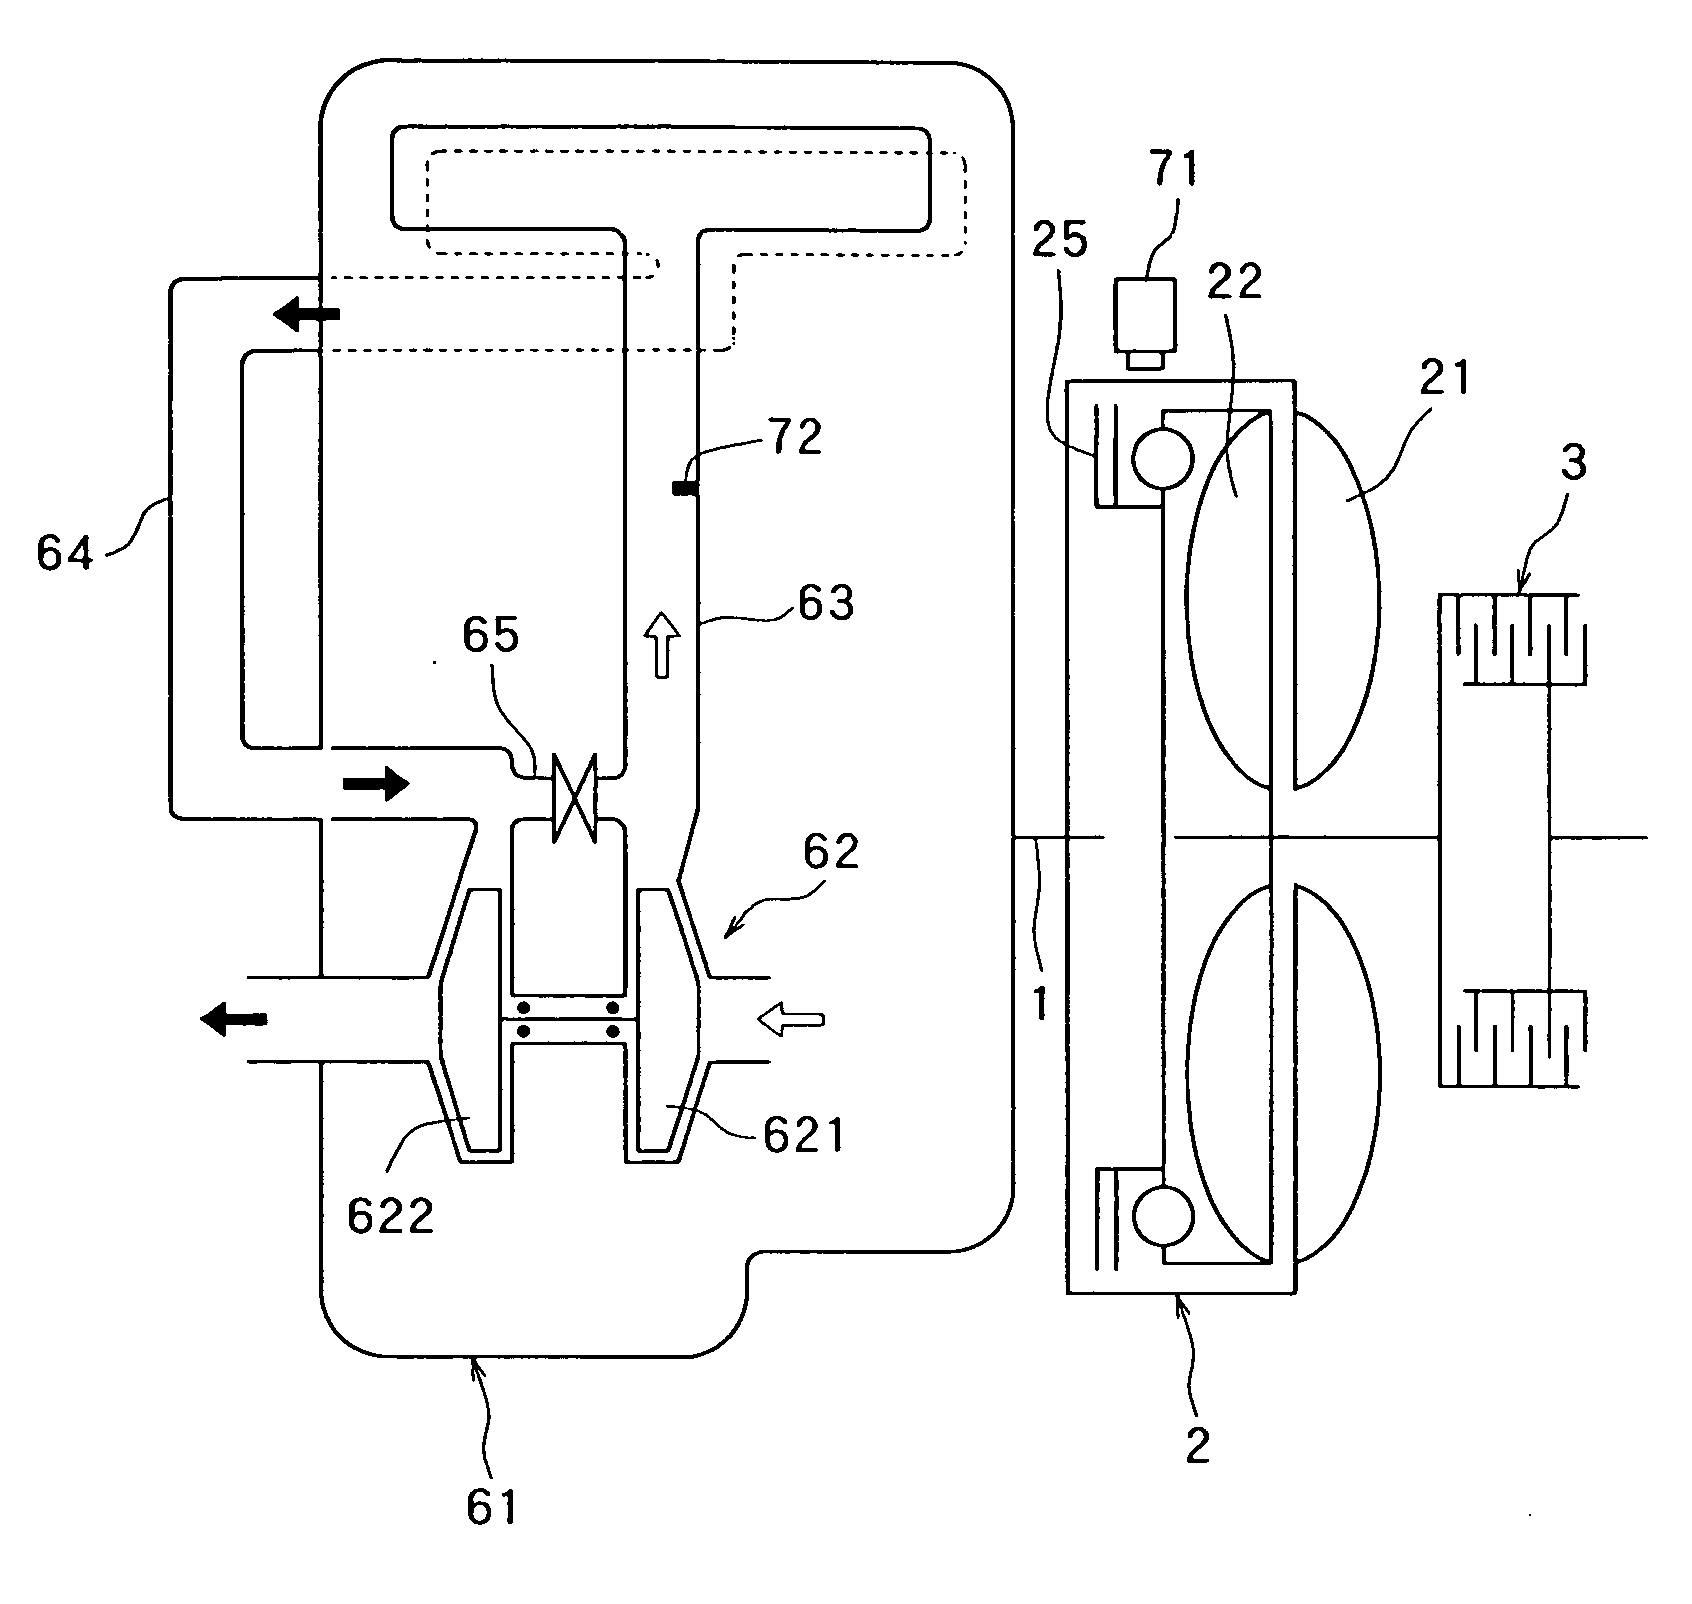 Vehicle Power Transmission Device Using A Fluid Coupling